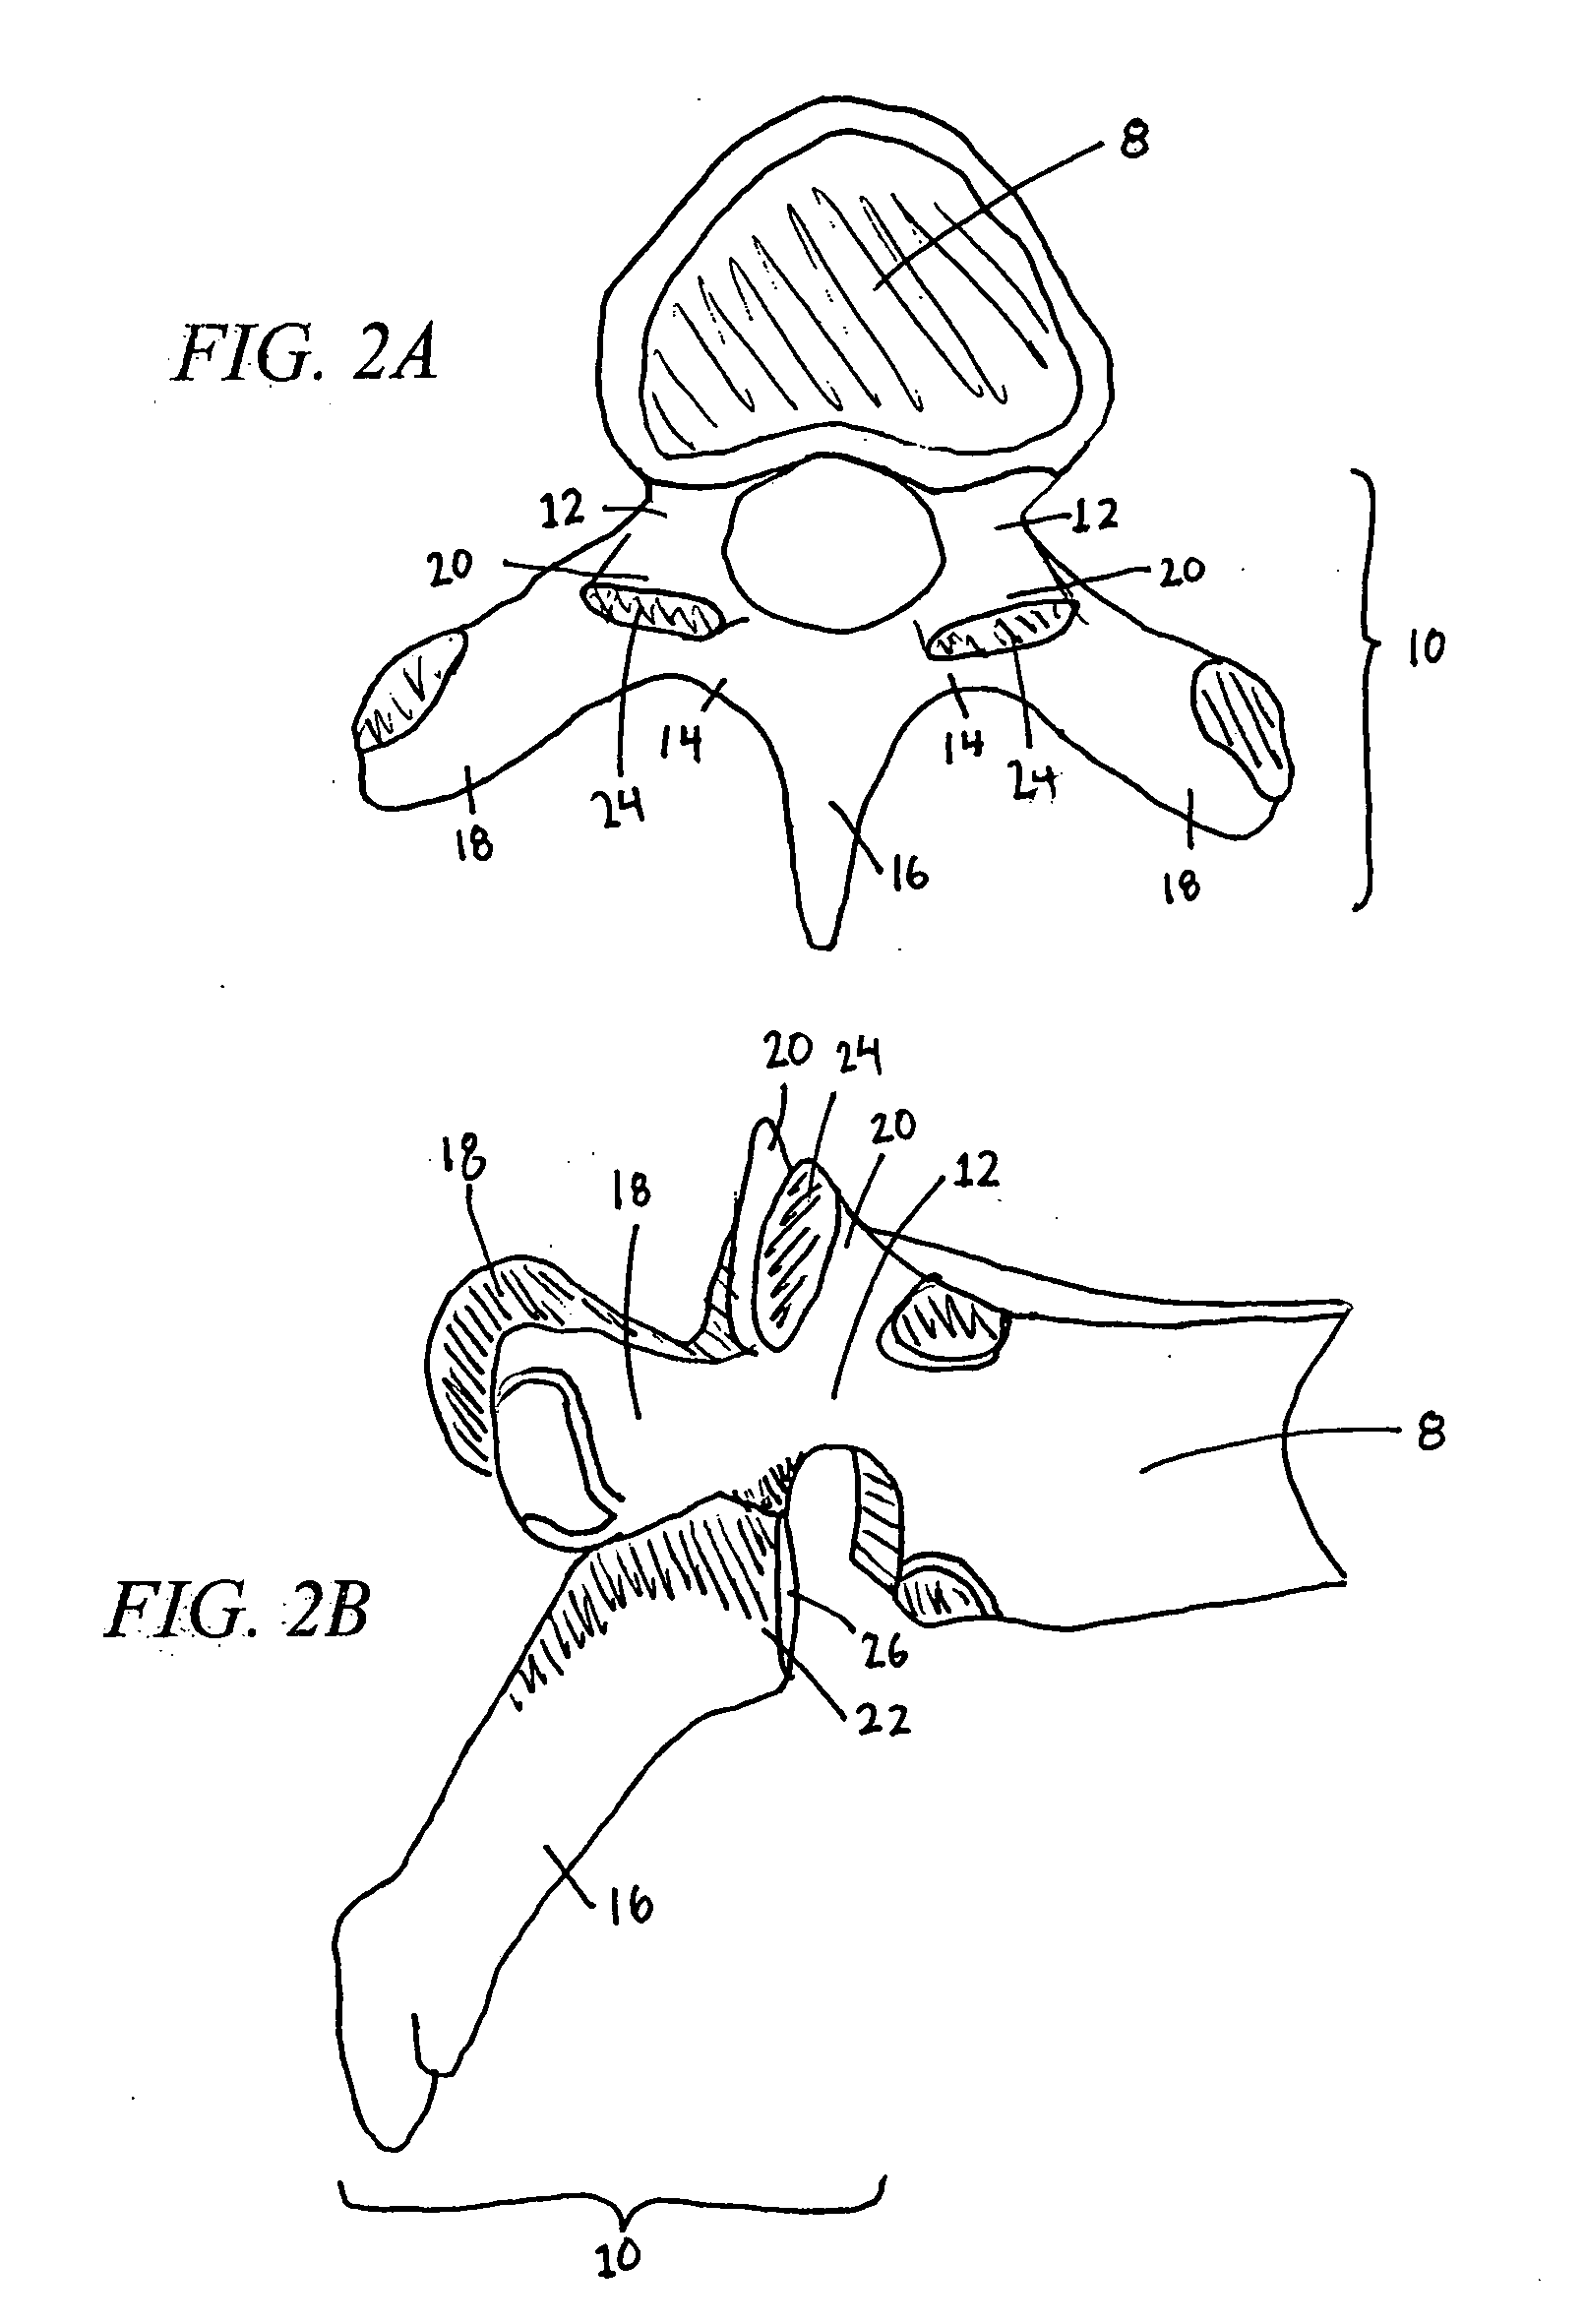 Vertebral facet joint prosthesis and method of fixation